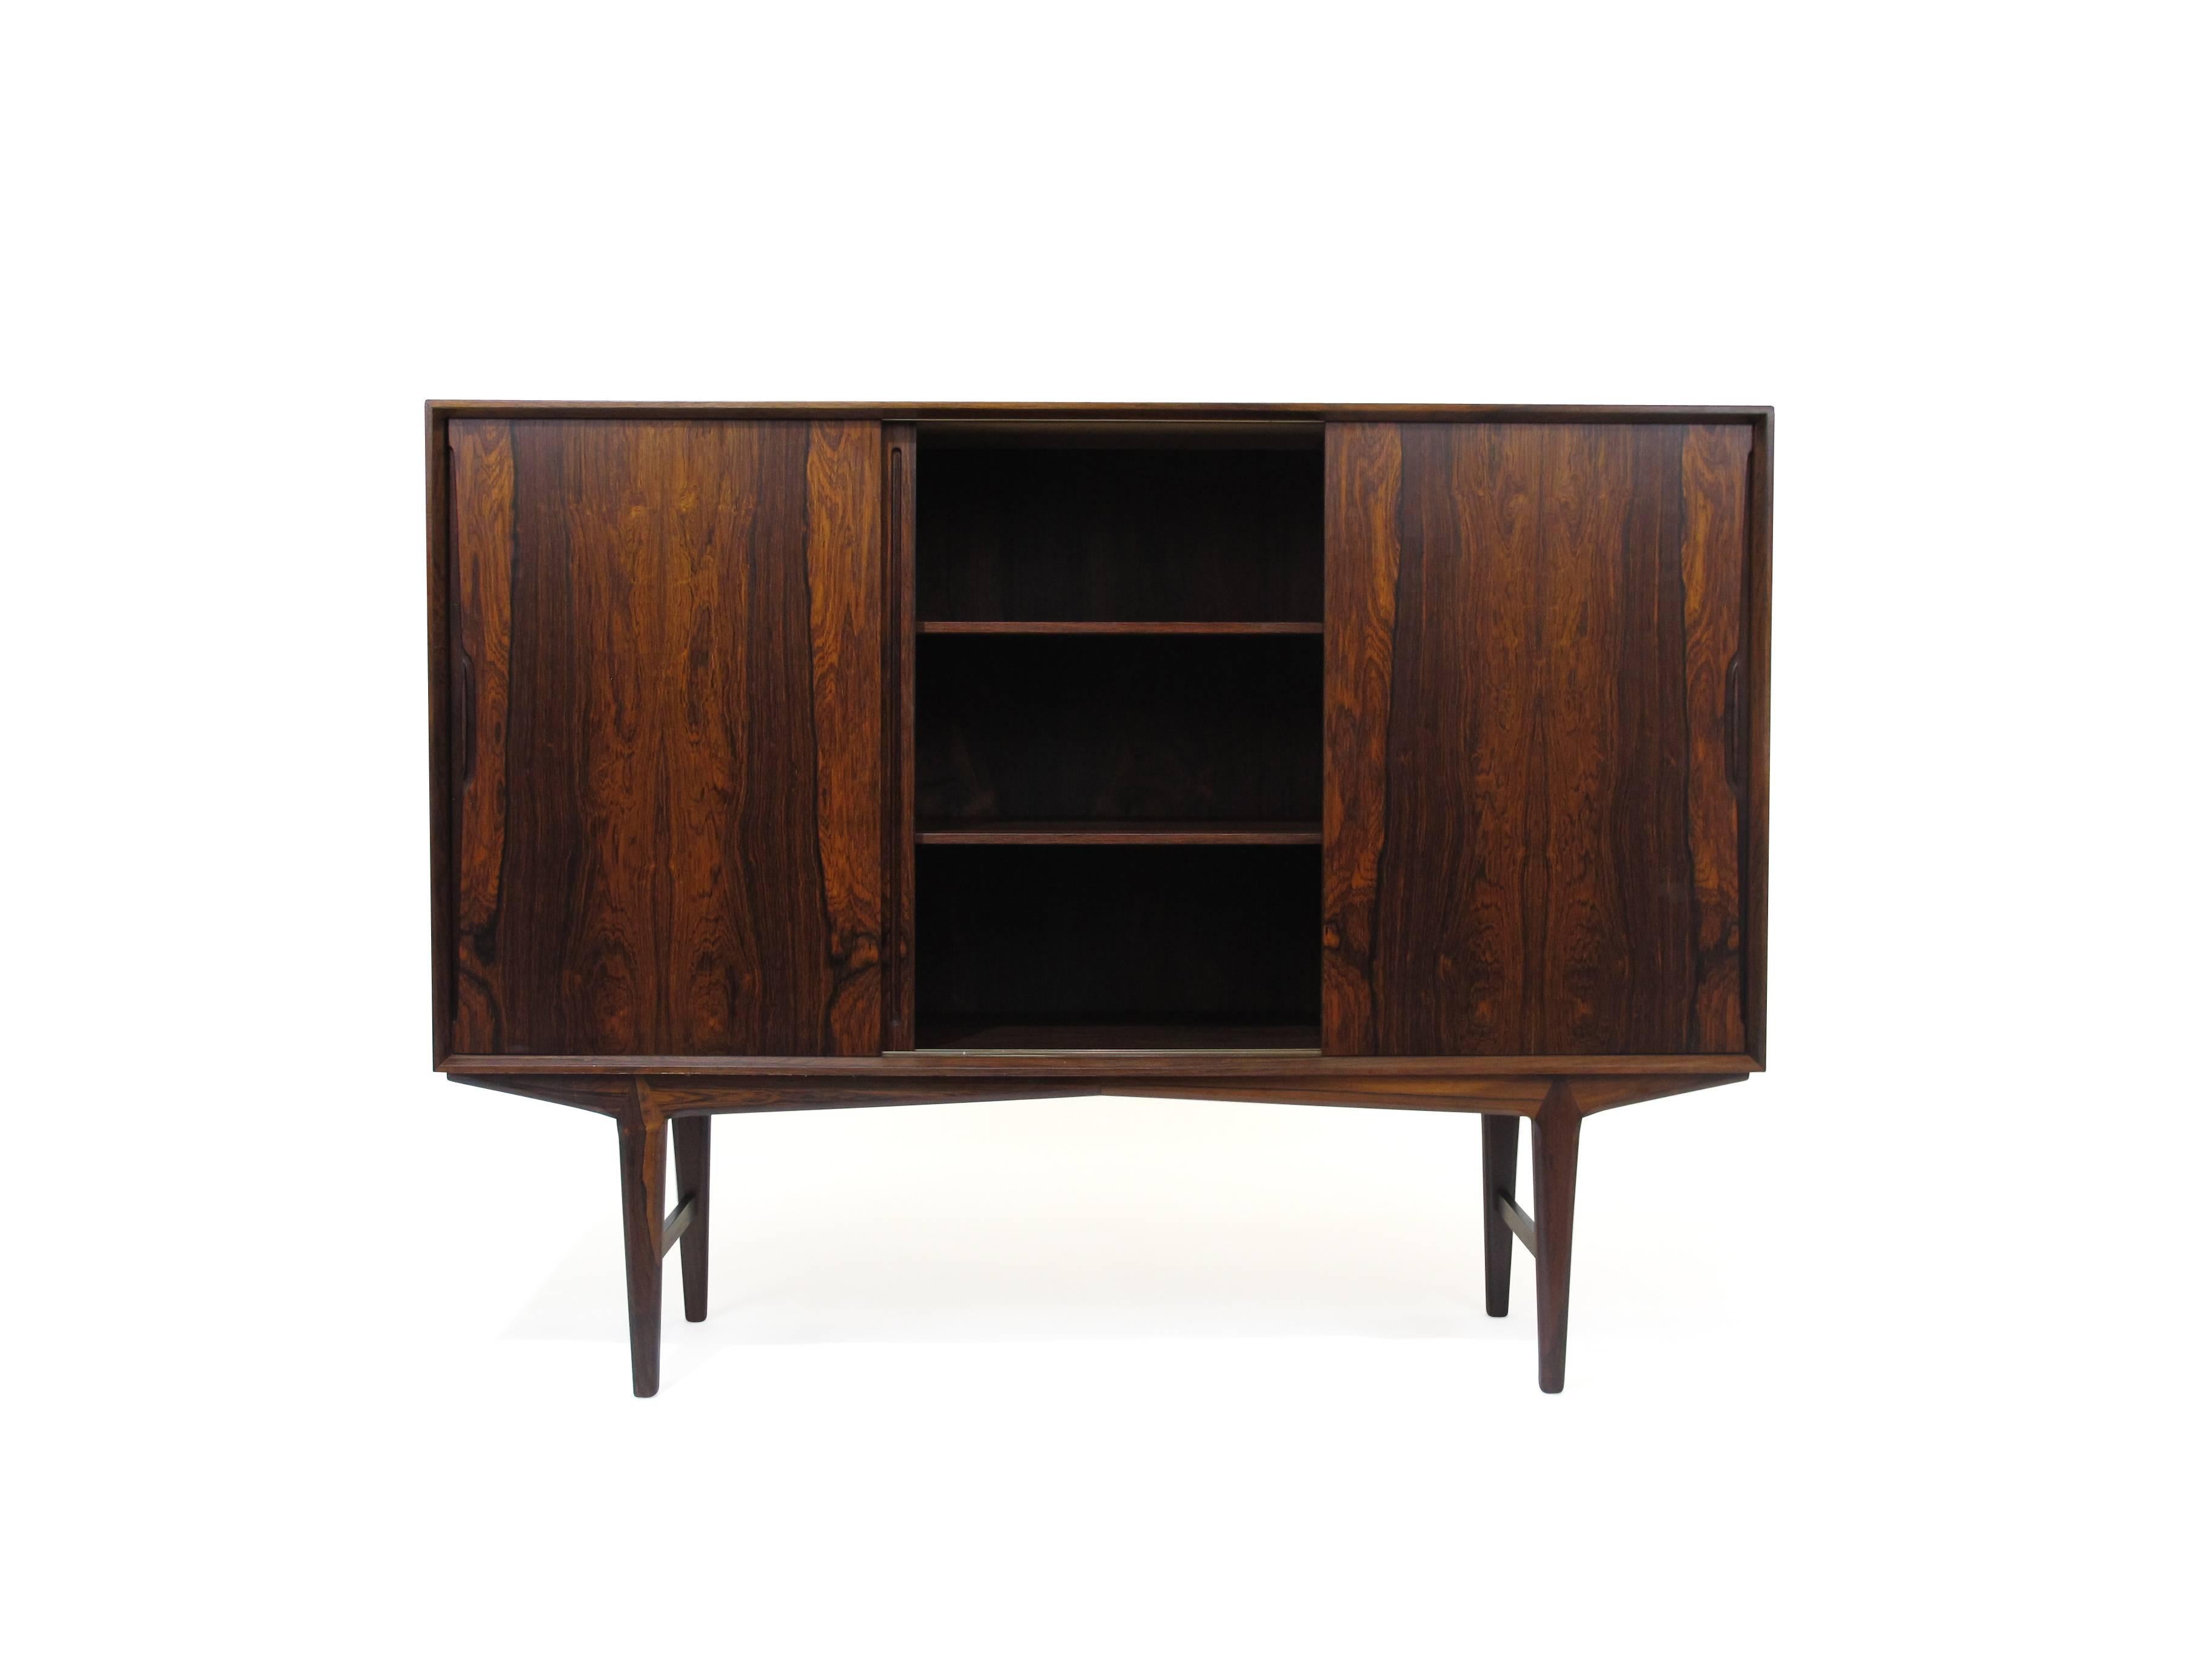 Rosewood sideboard with triple sliding doors with bookmatched graining and inset pulls, adjustable shelves, silverware drawers, raised on tapered legs.